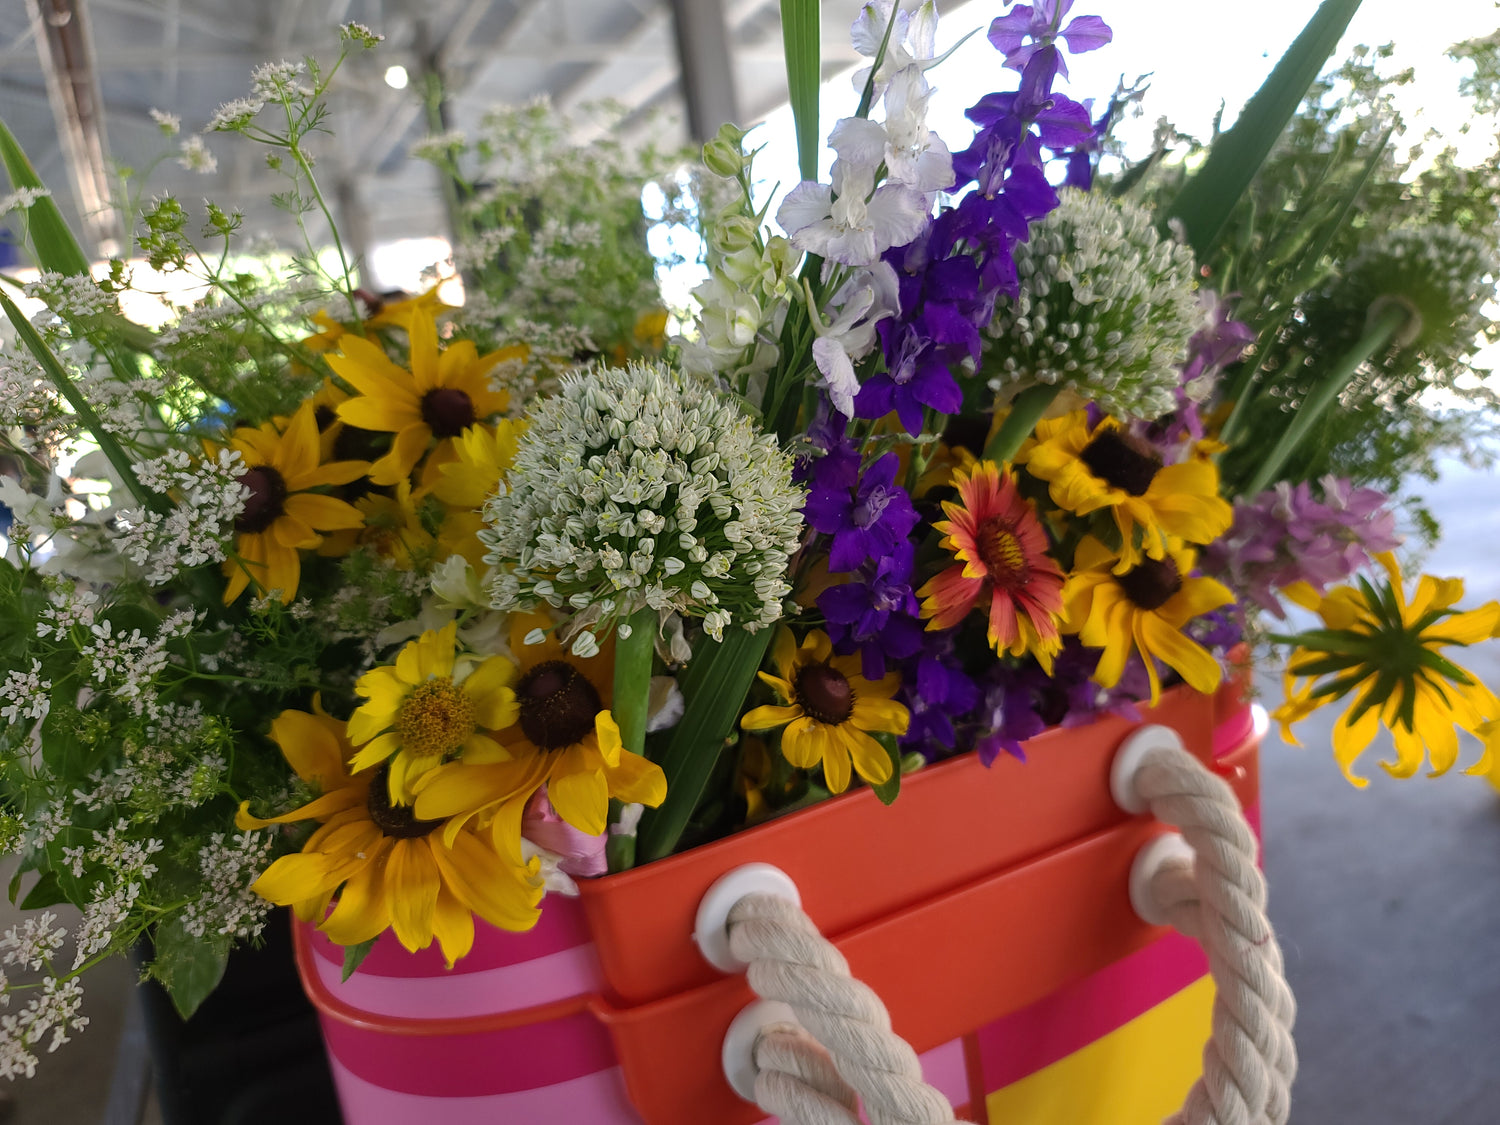 Flowers at the Dallas Farmers Market